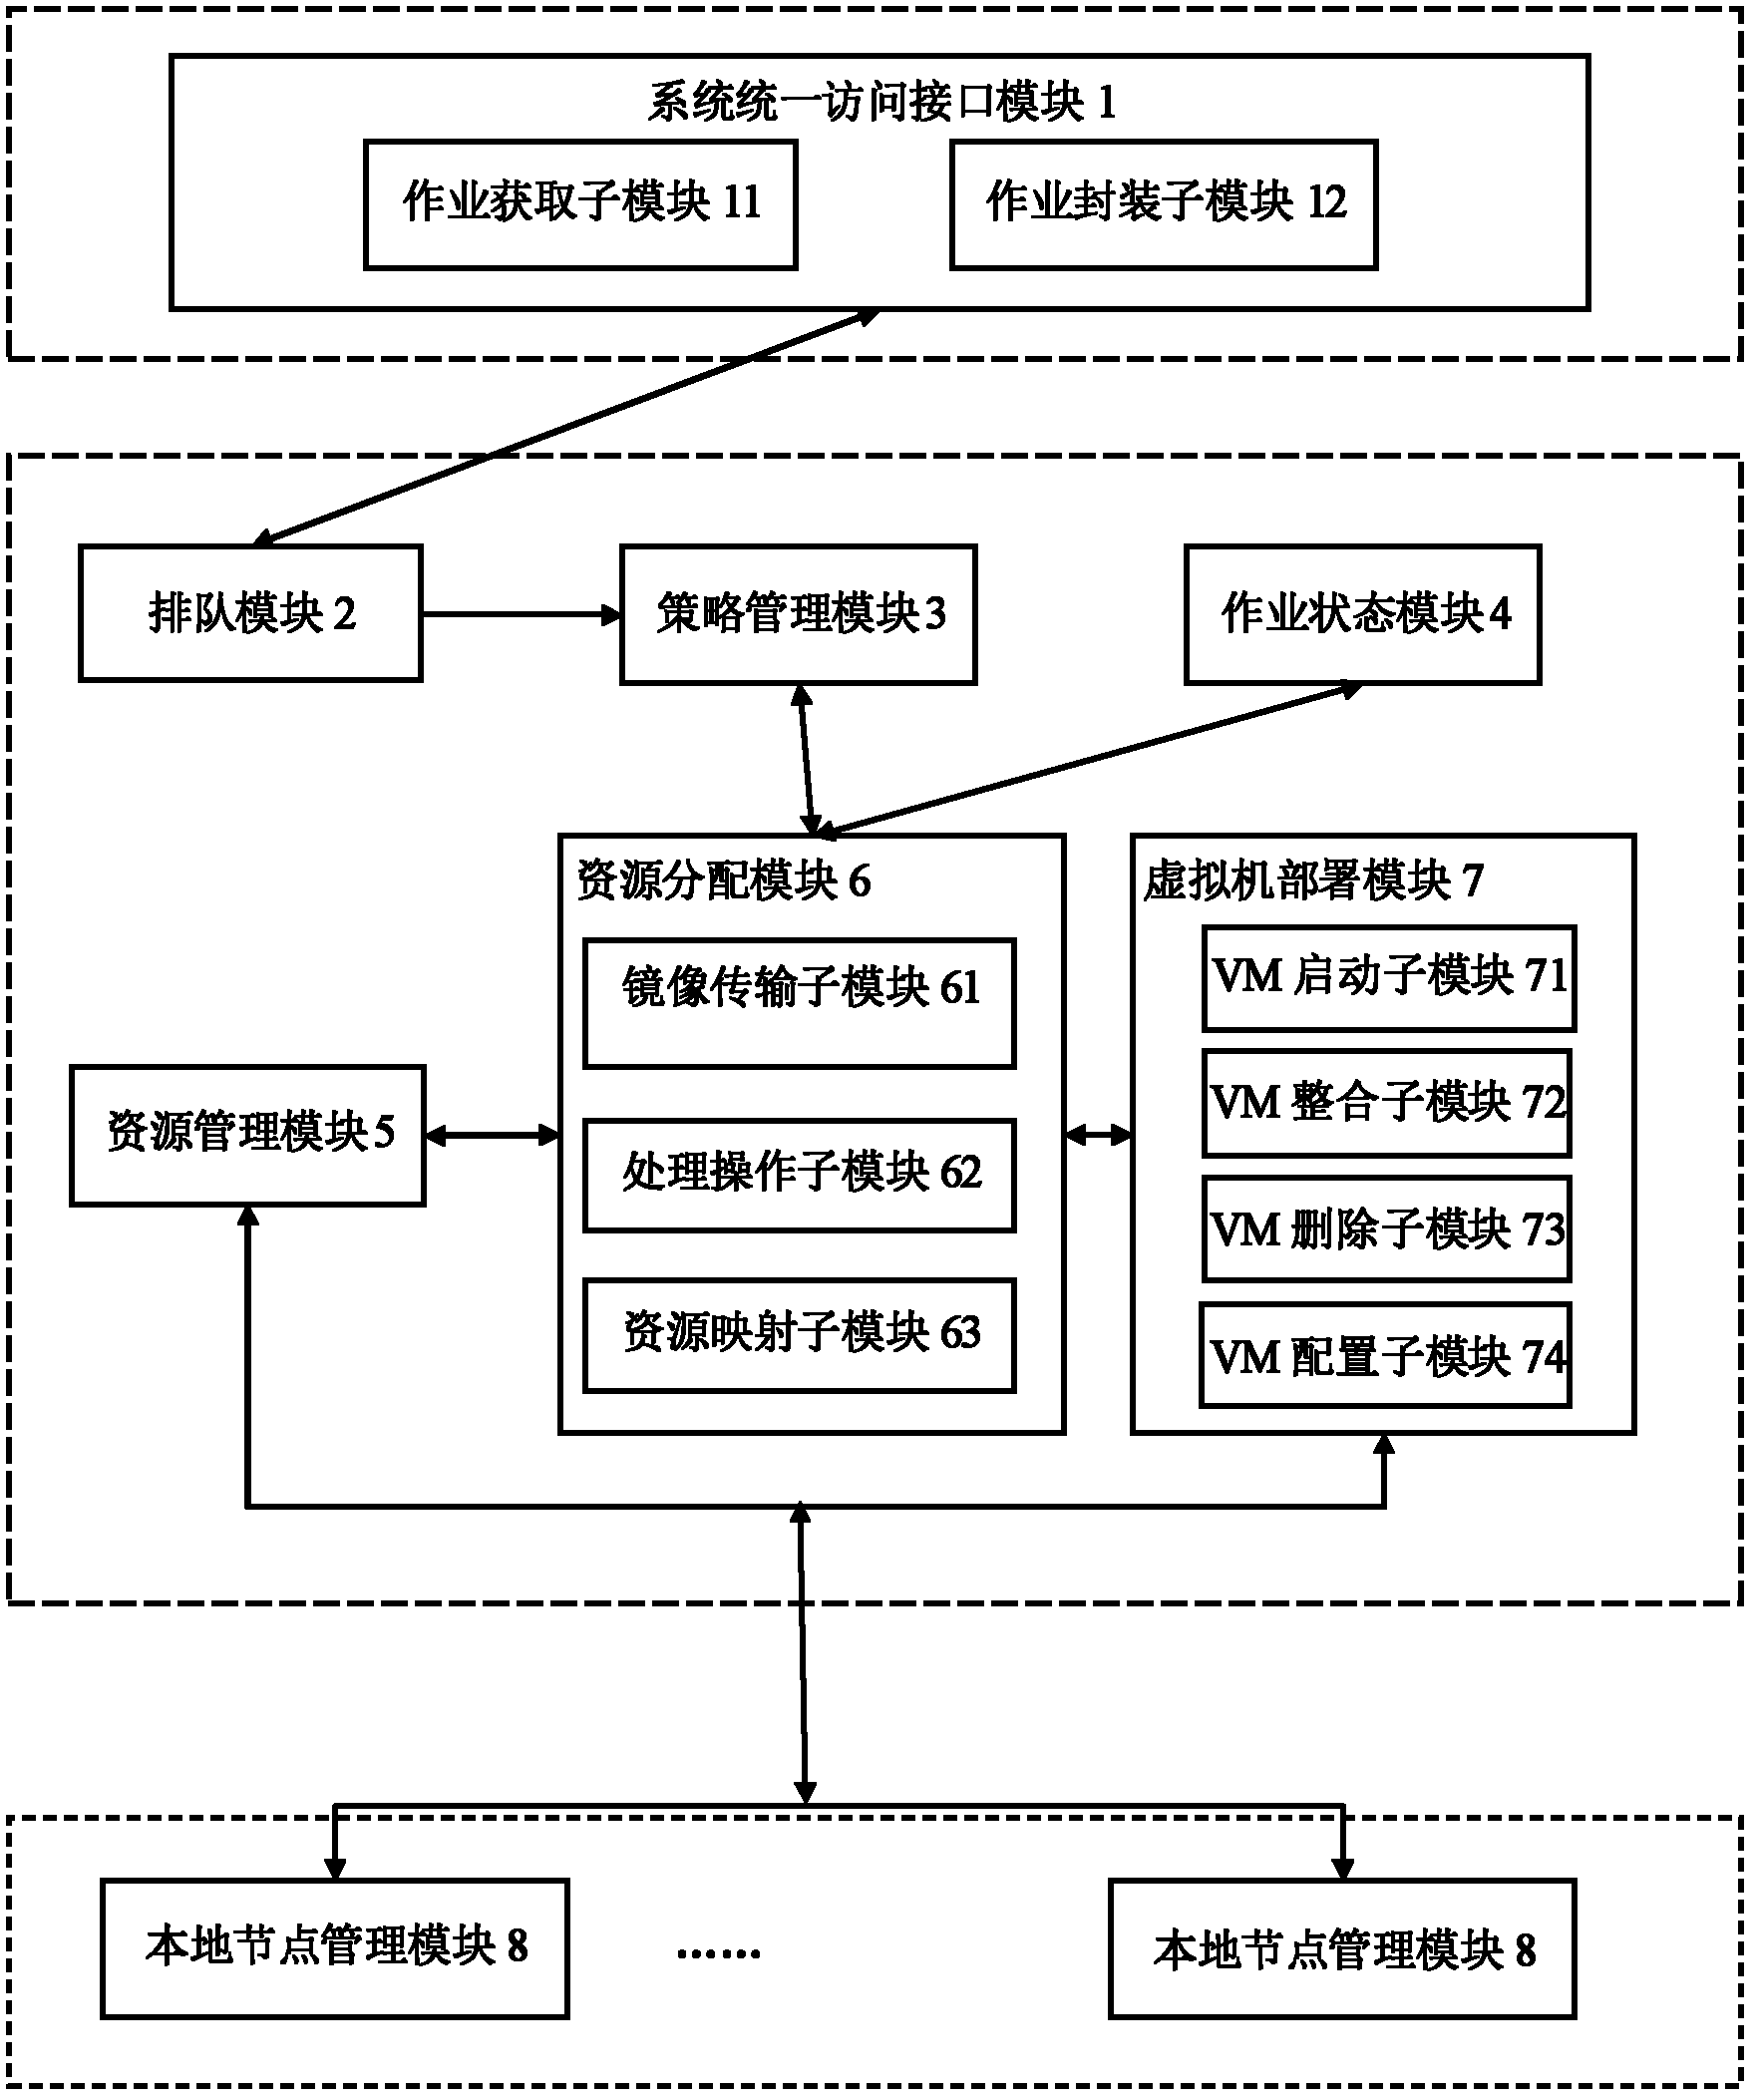 Dynamic operation scheduling system of virtual machine